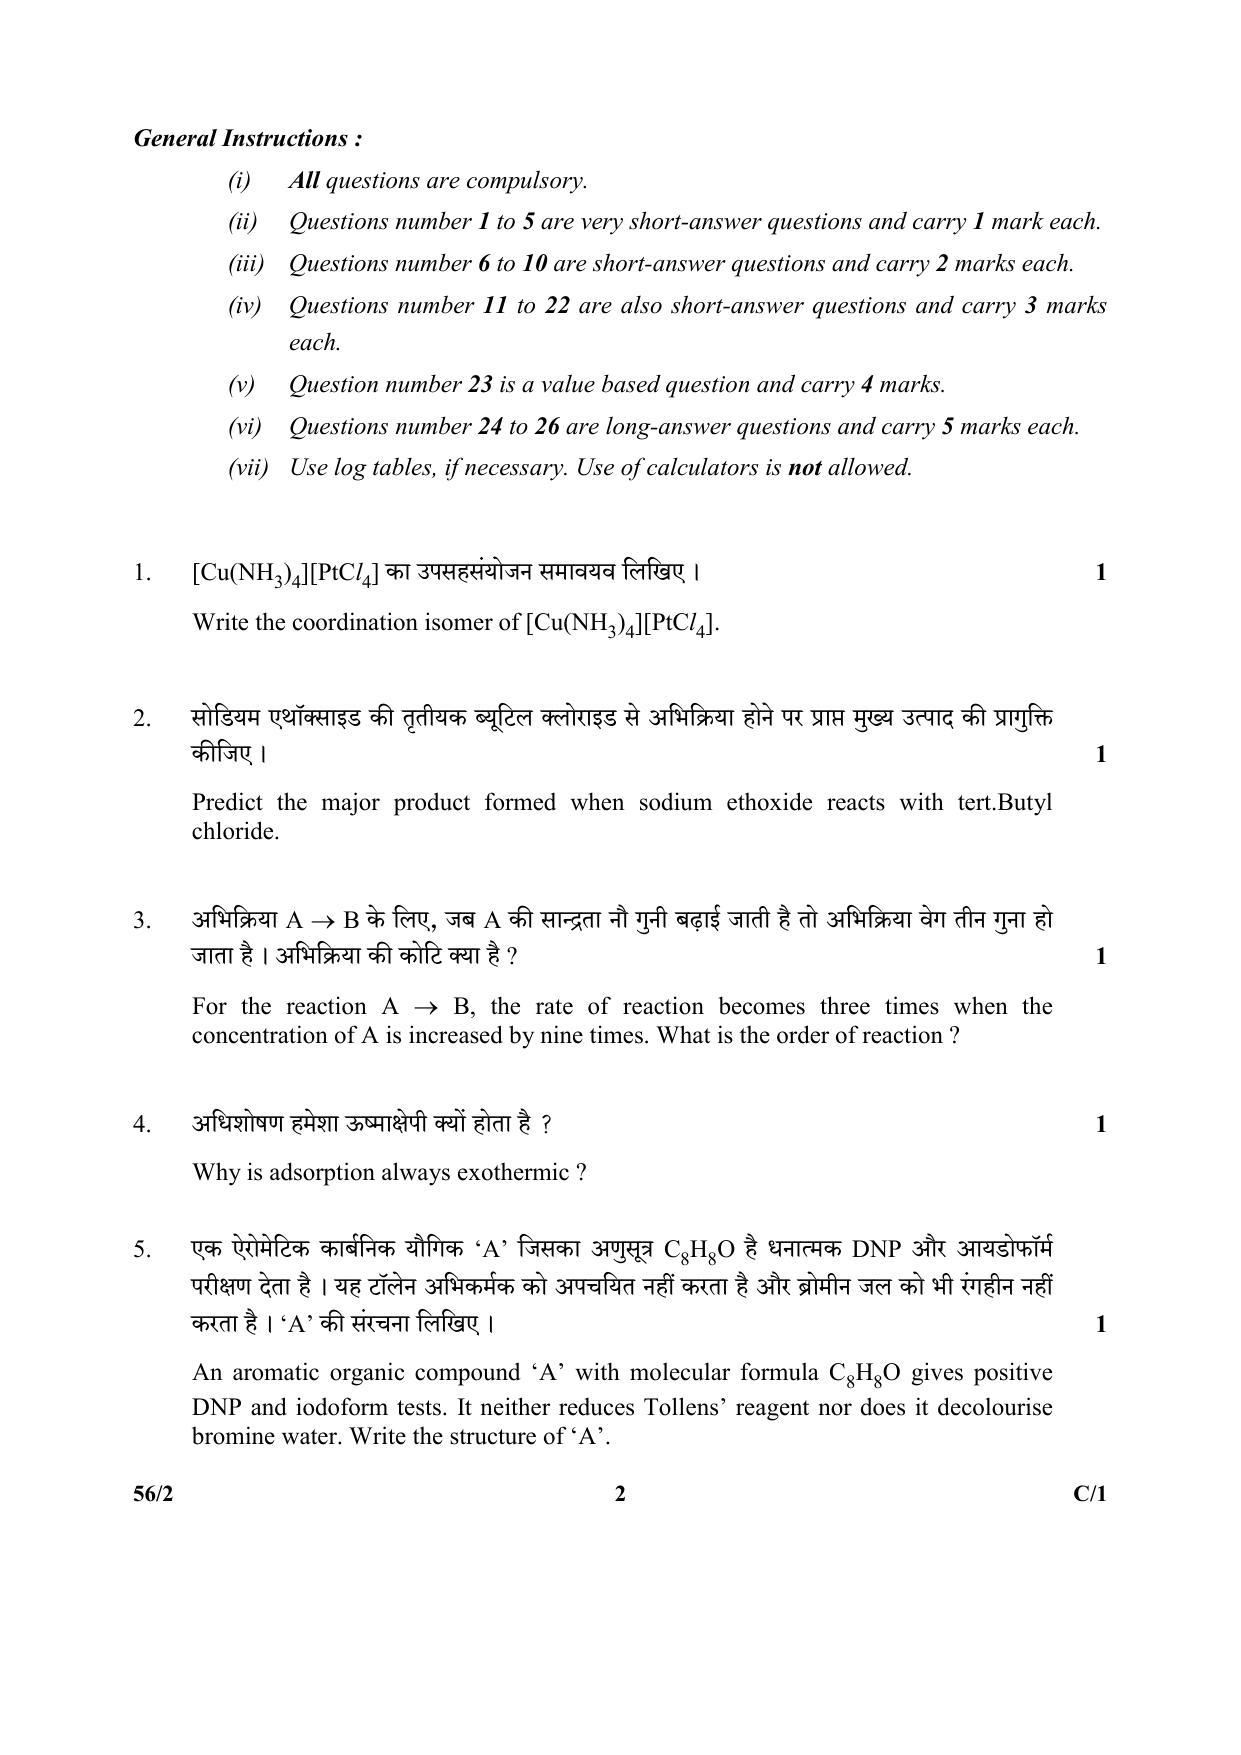 CBSE Class 12 56-2 (Chemistry) 2018 Compartment Question Paper - Page 2